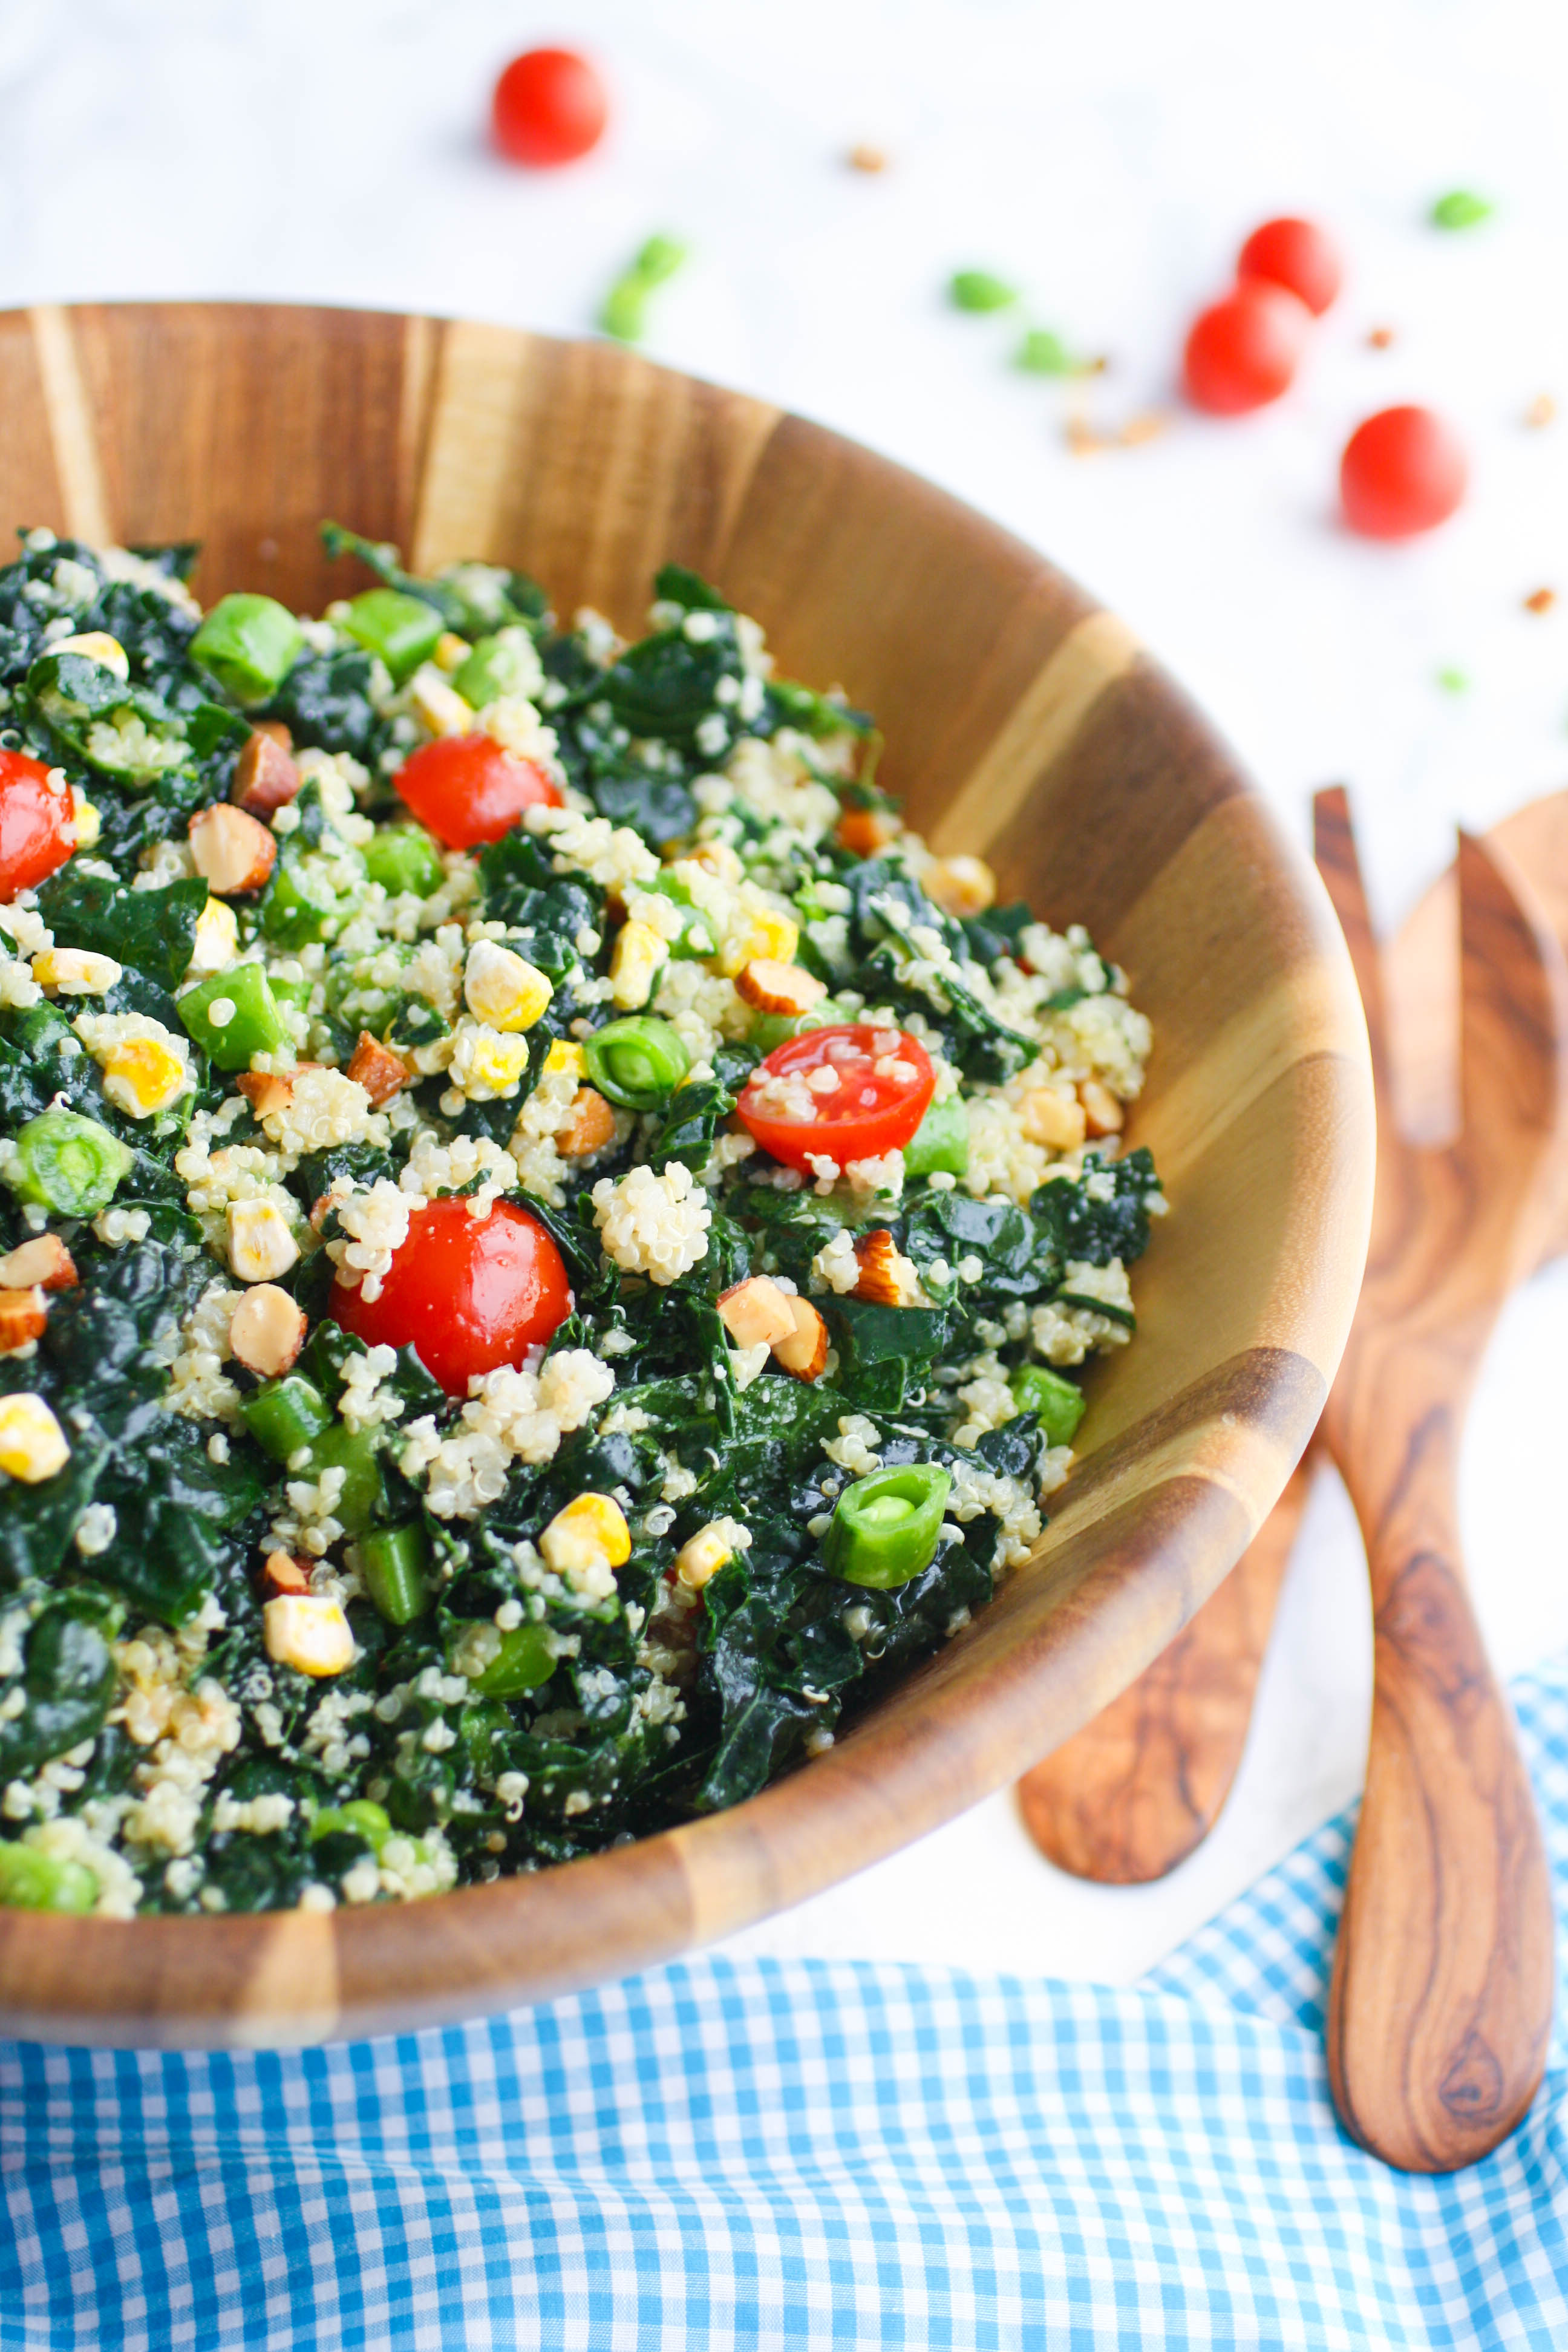 Kale and Quinoa Salad with Honey-Dijon Dressing is a great part of a light meal. You'll love how easy it is to make Kale and Quinoa Salad with Honey-Dijon Dressing.